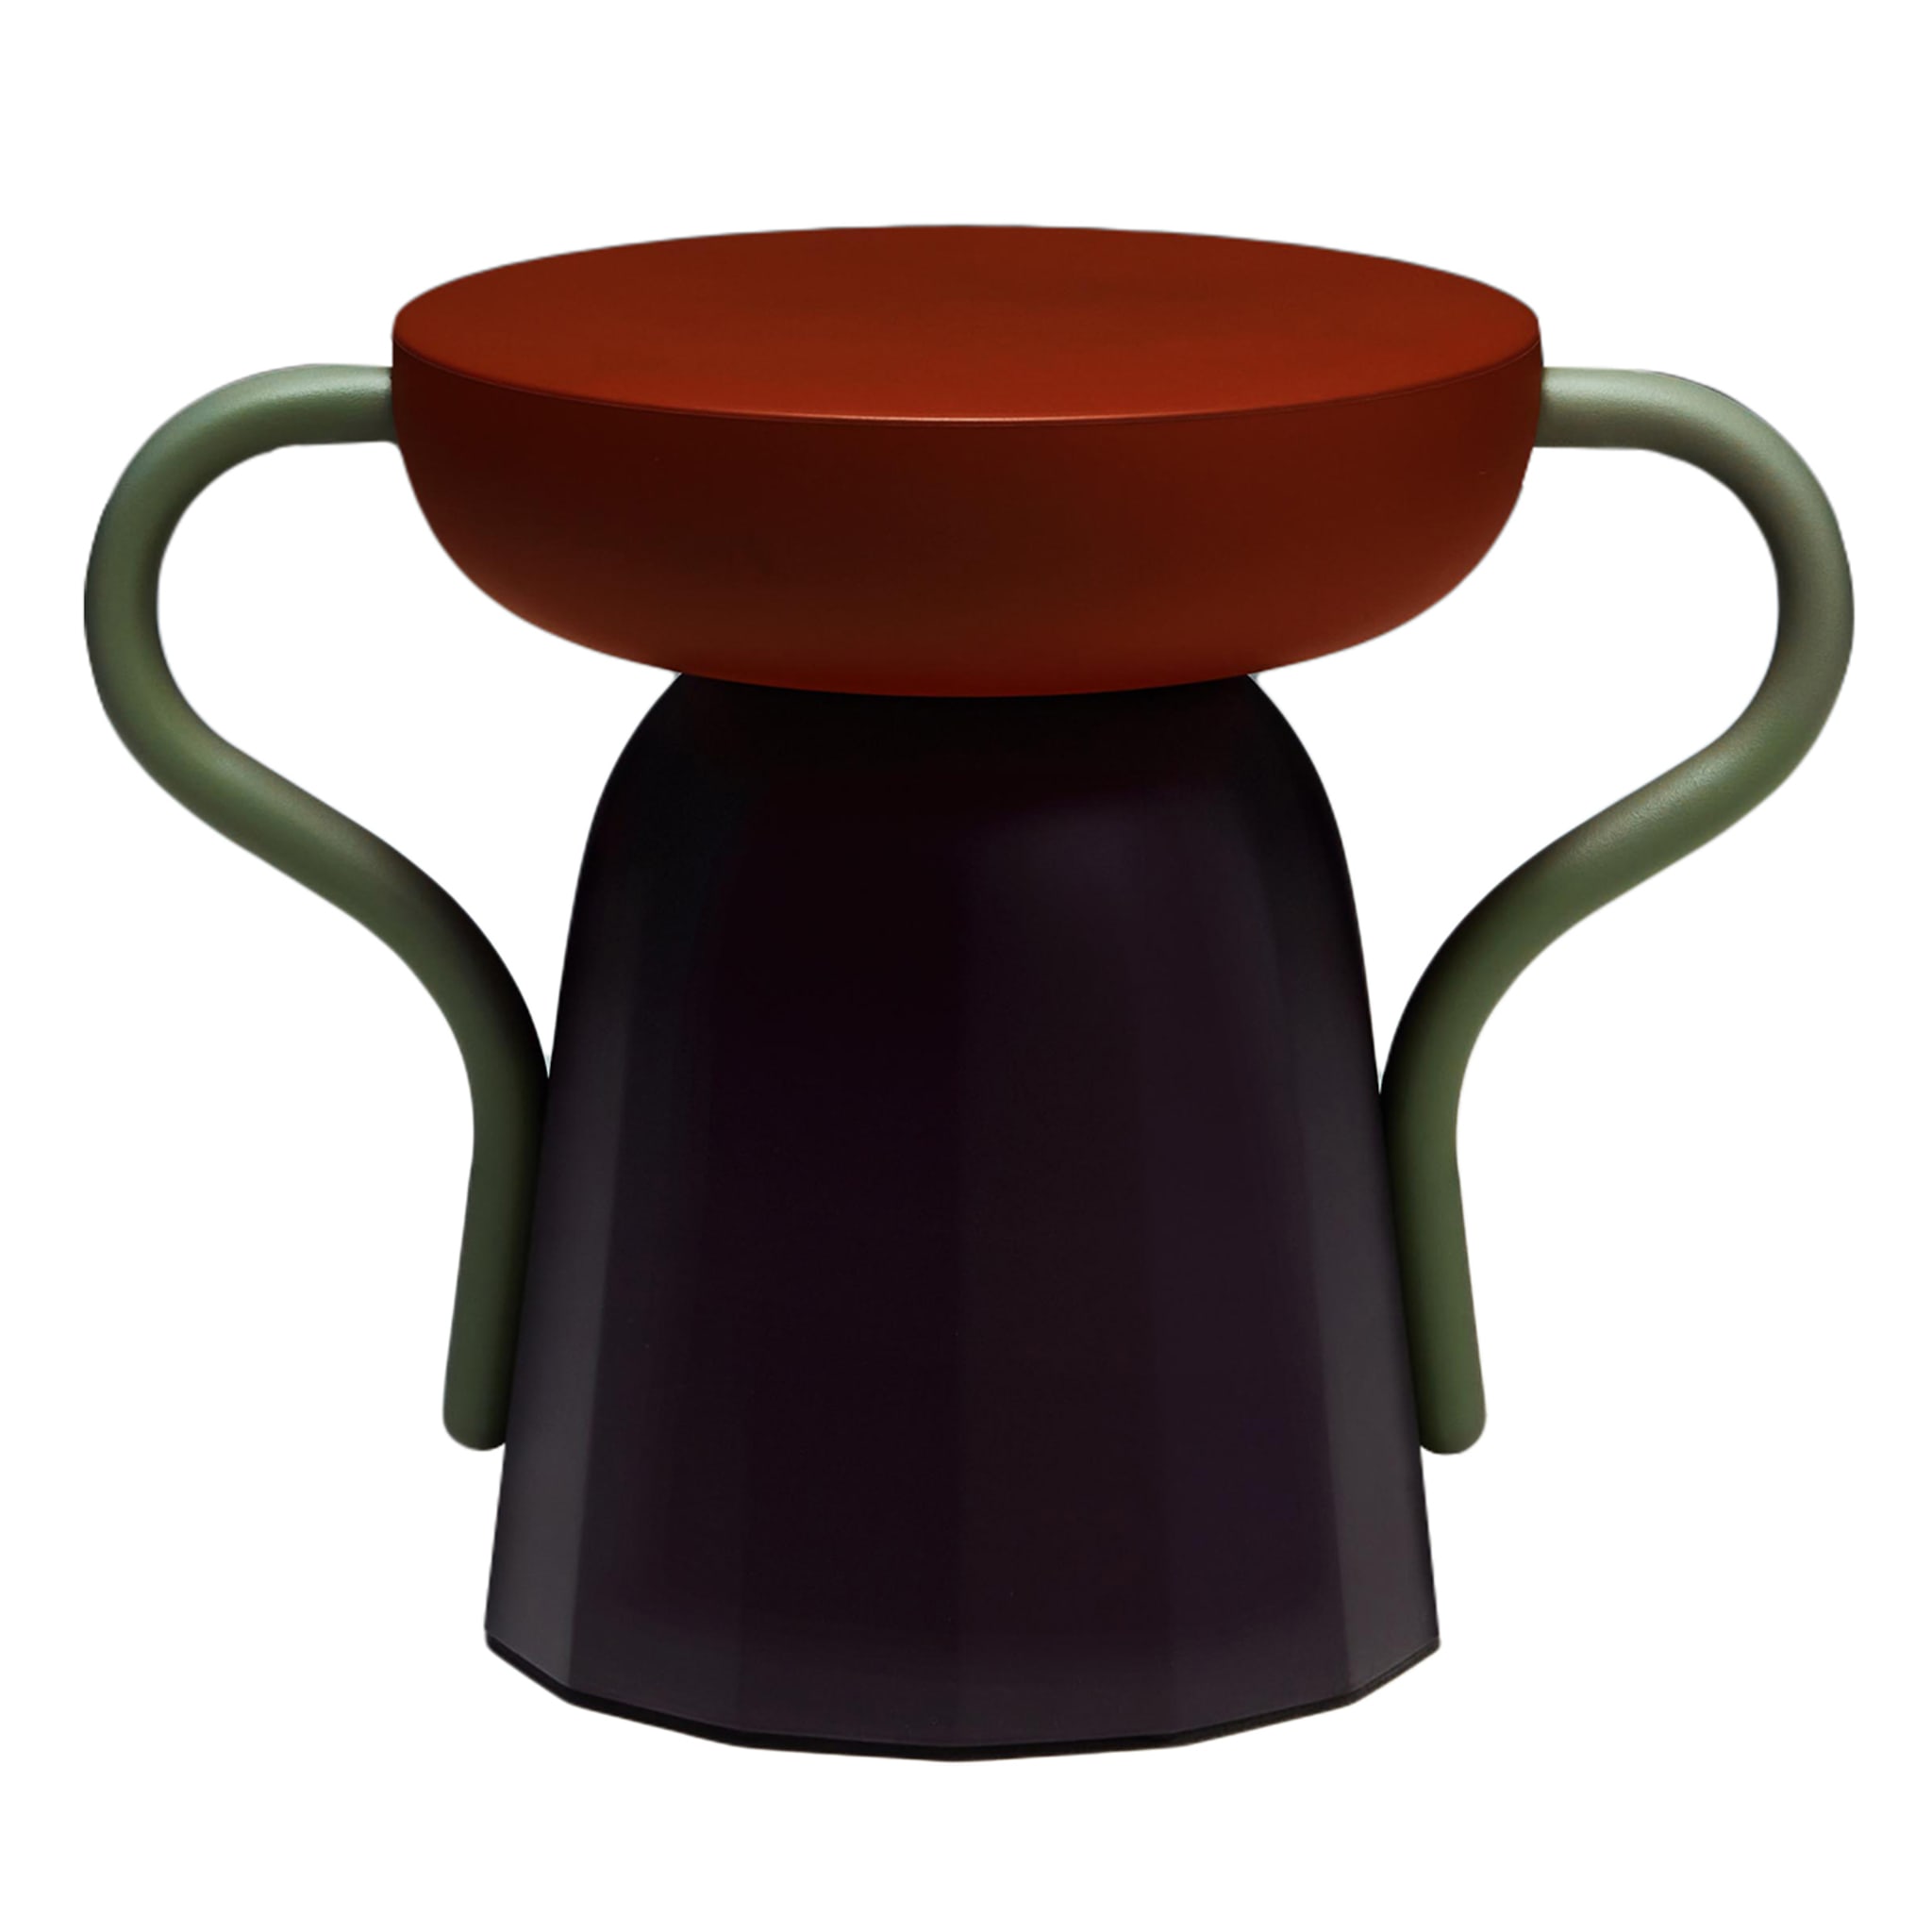 Allié Red Stool by Luca Nichetto - Main view